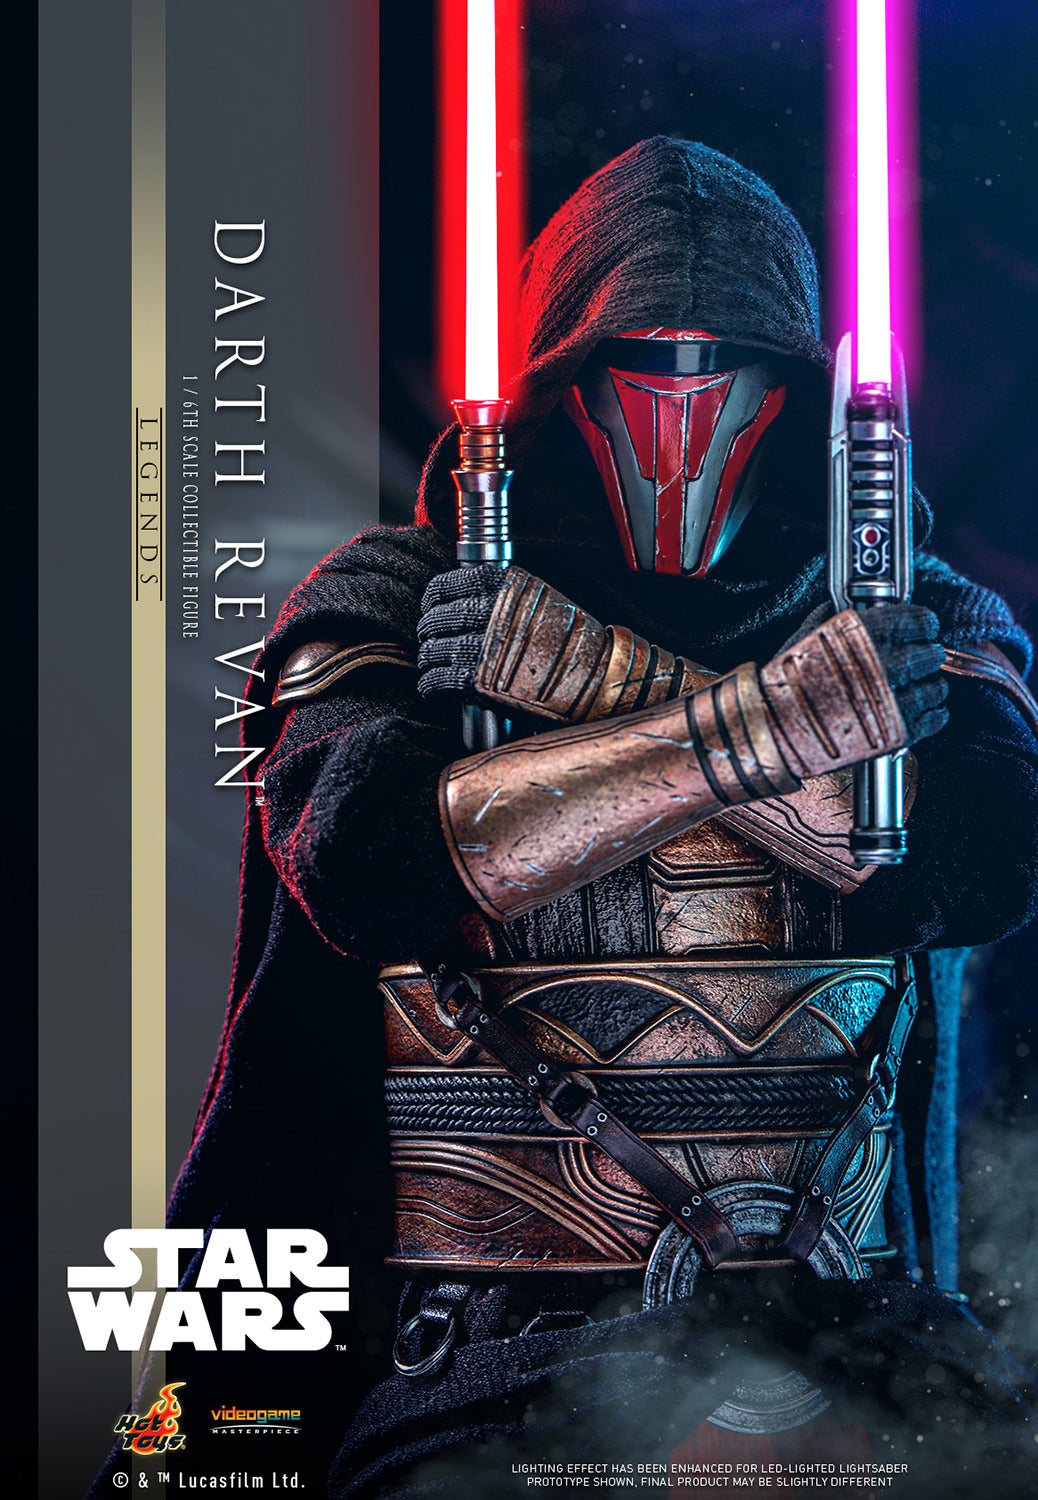 Darth Revan Sixth Scale Figure by Hot Toys